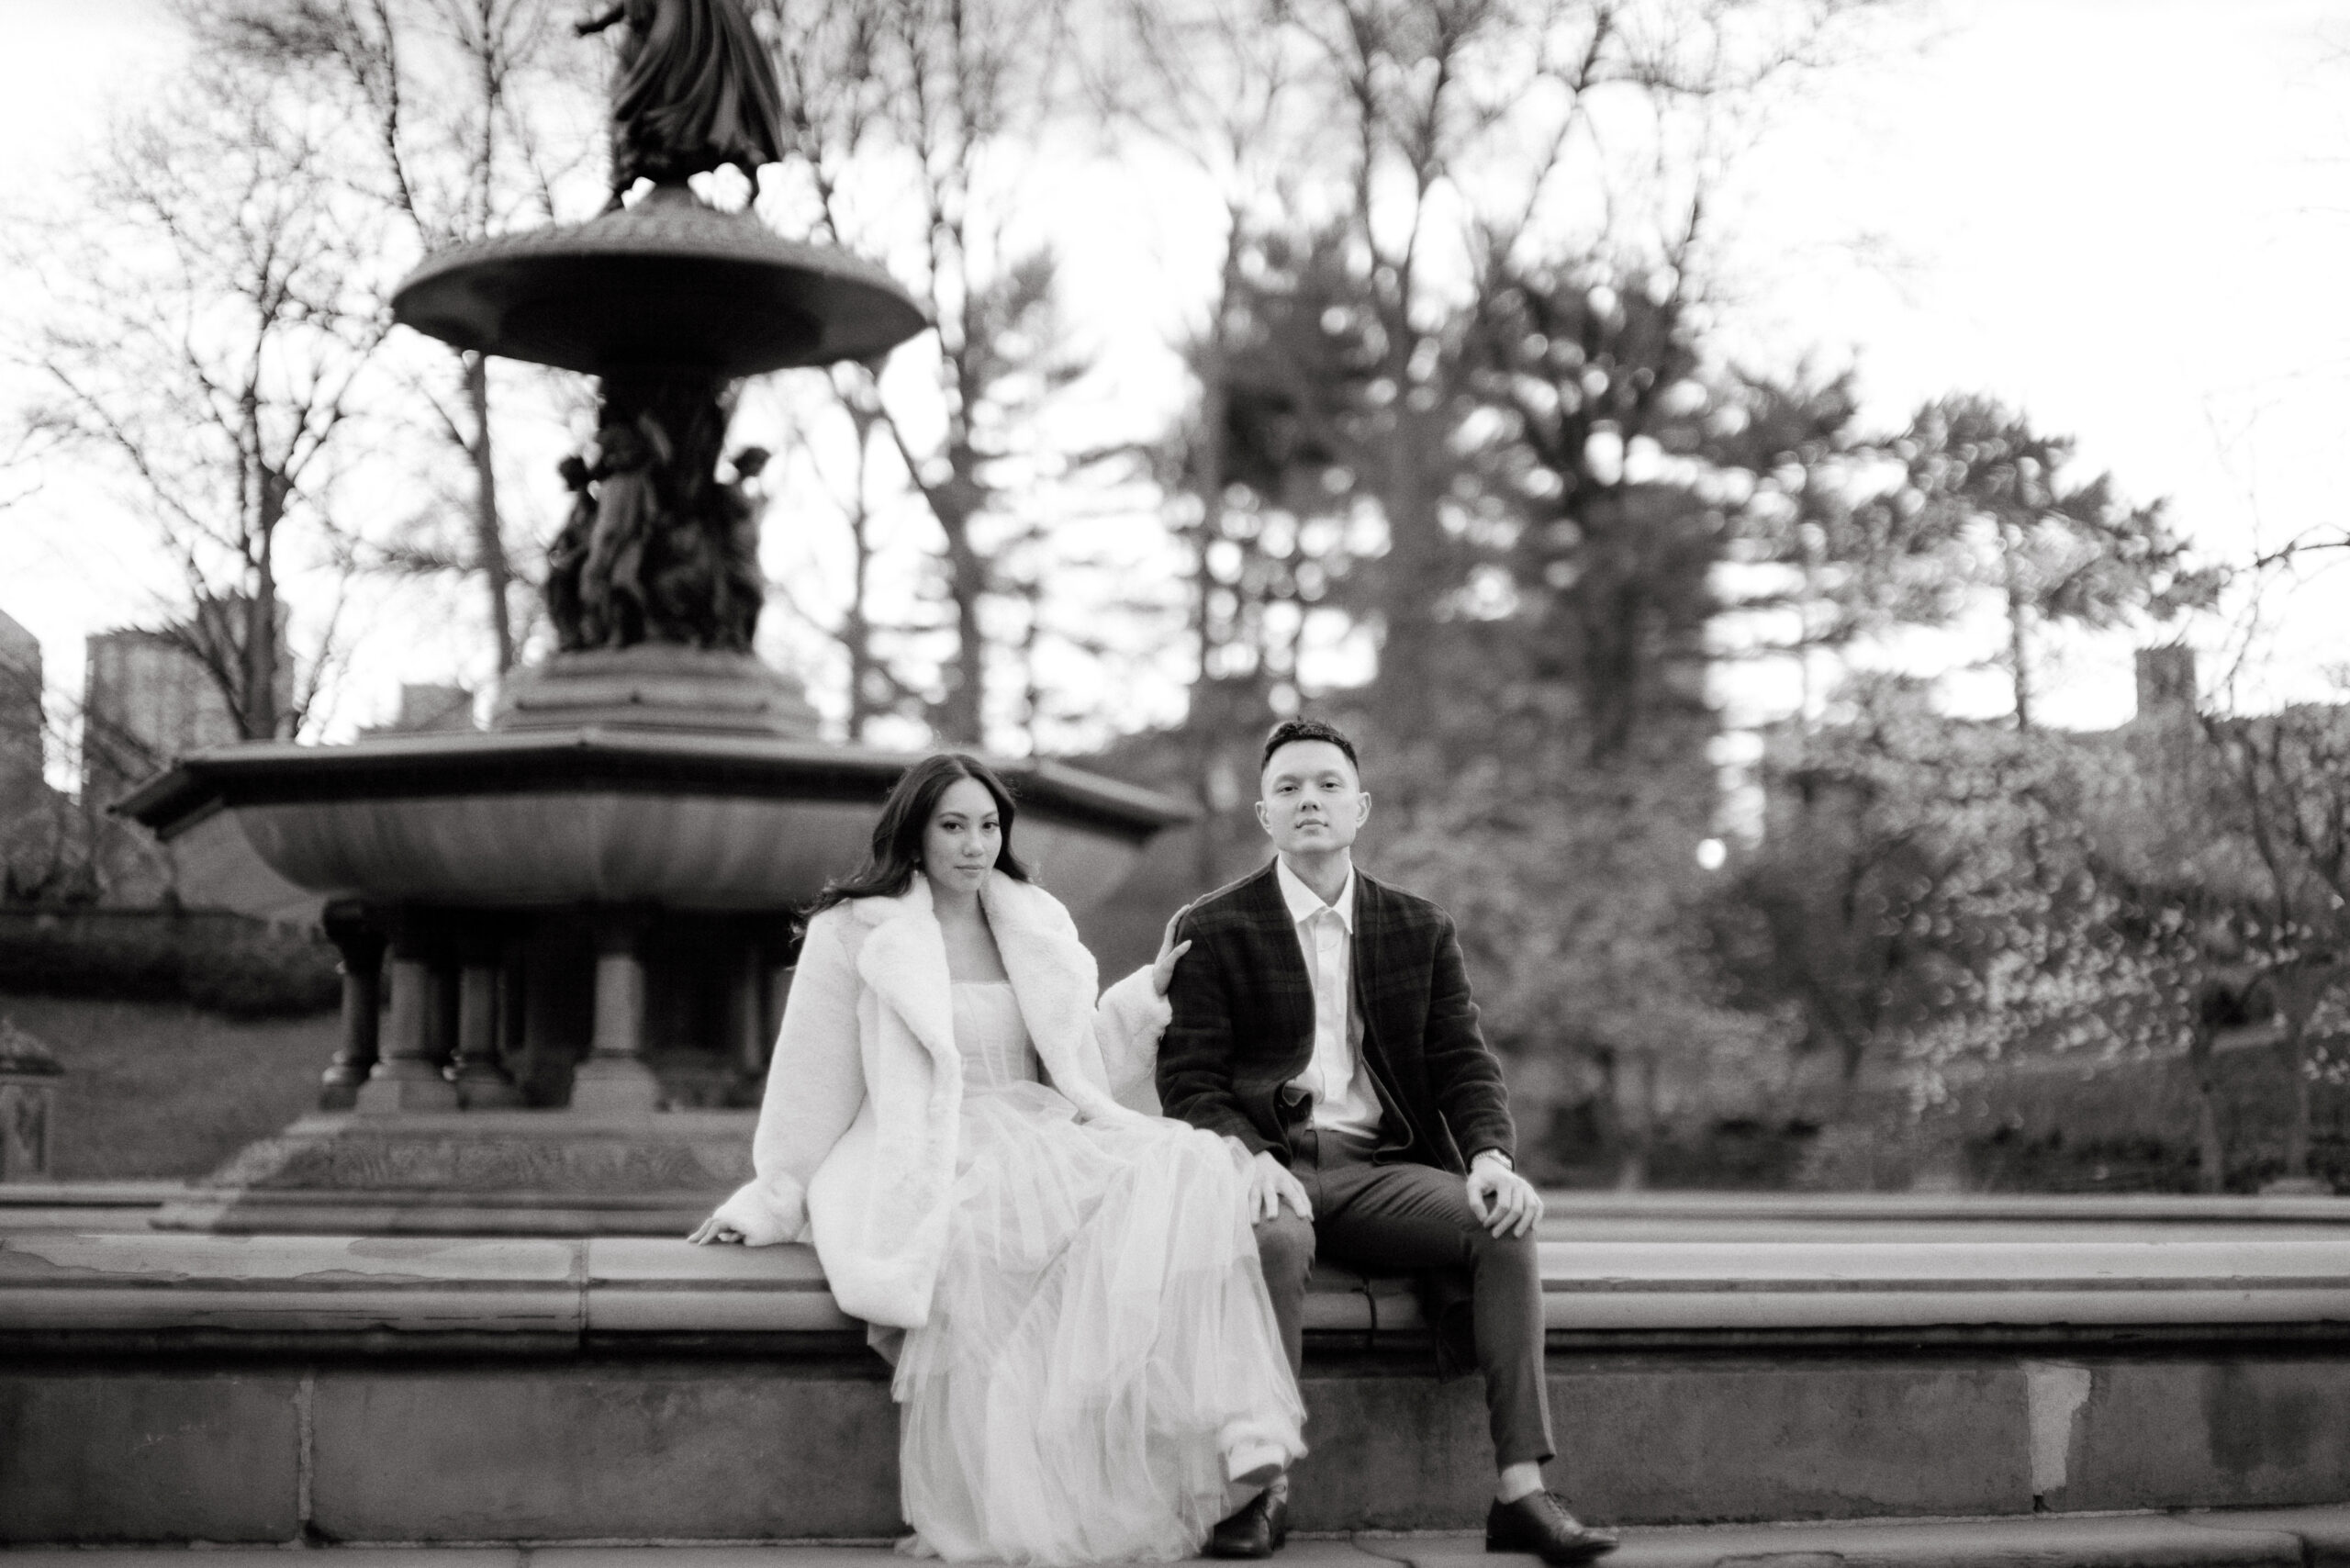 The engaged couple are sitting in Bethesda Fountain, NYC. Engagement Photo image by Jenny Fu Studio